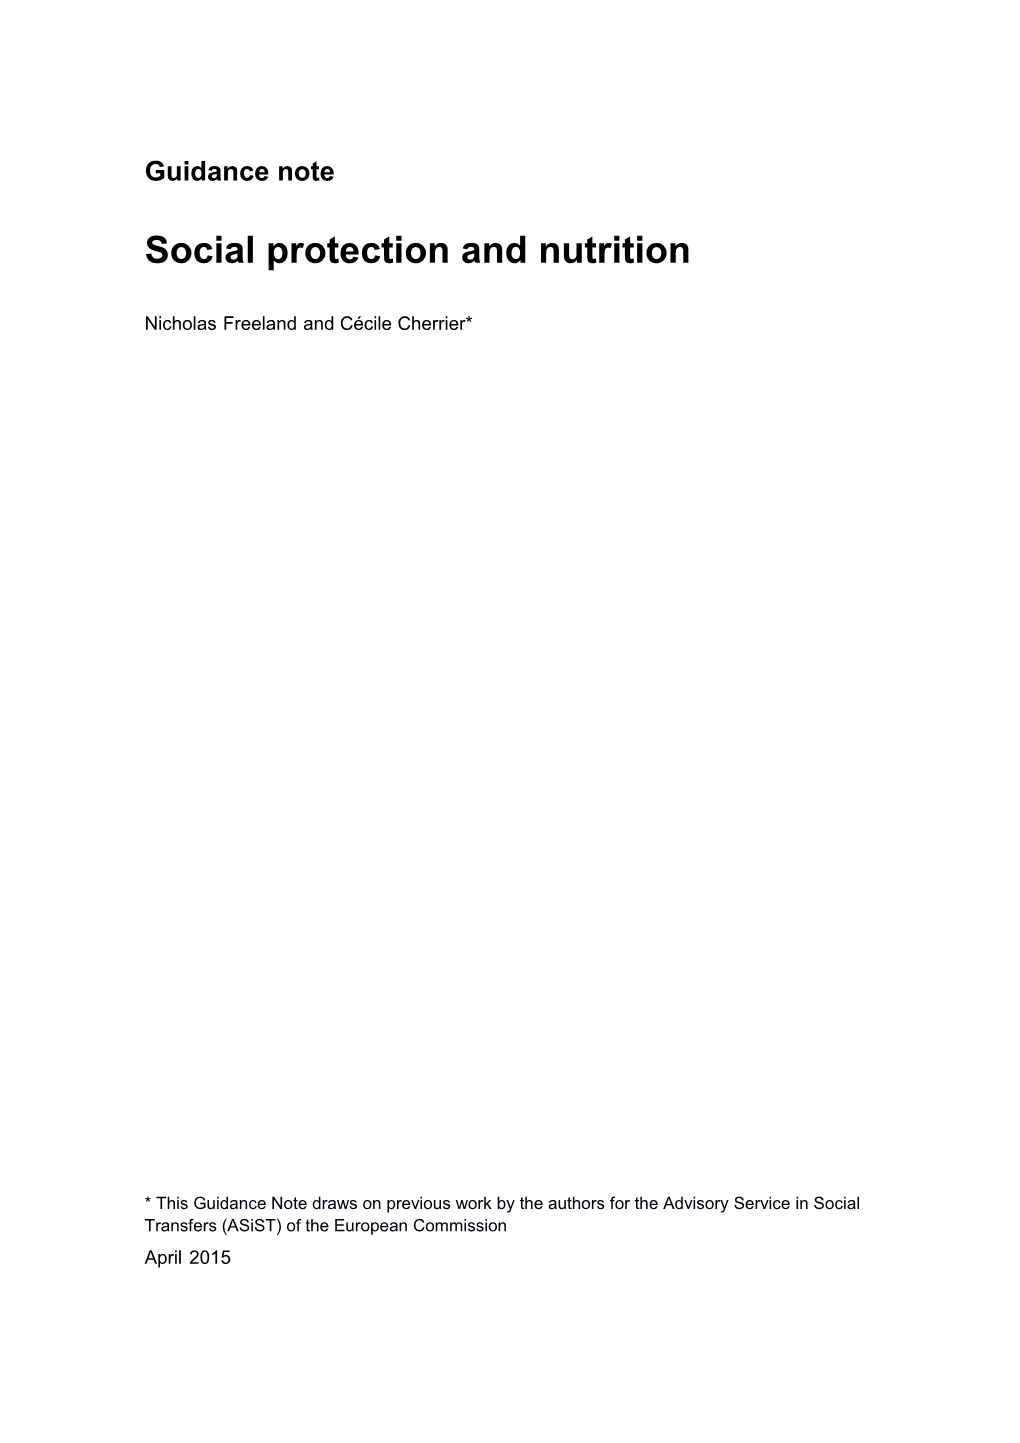 Social Protection and Nutrition